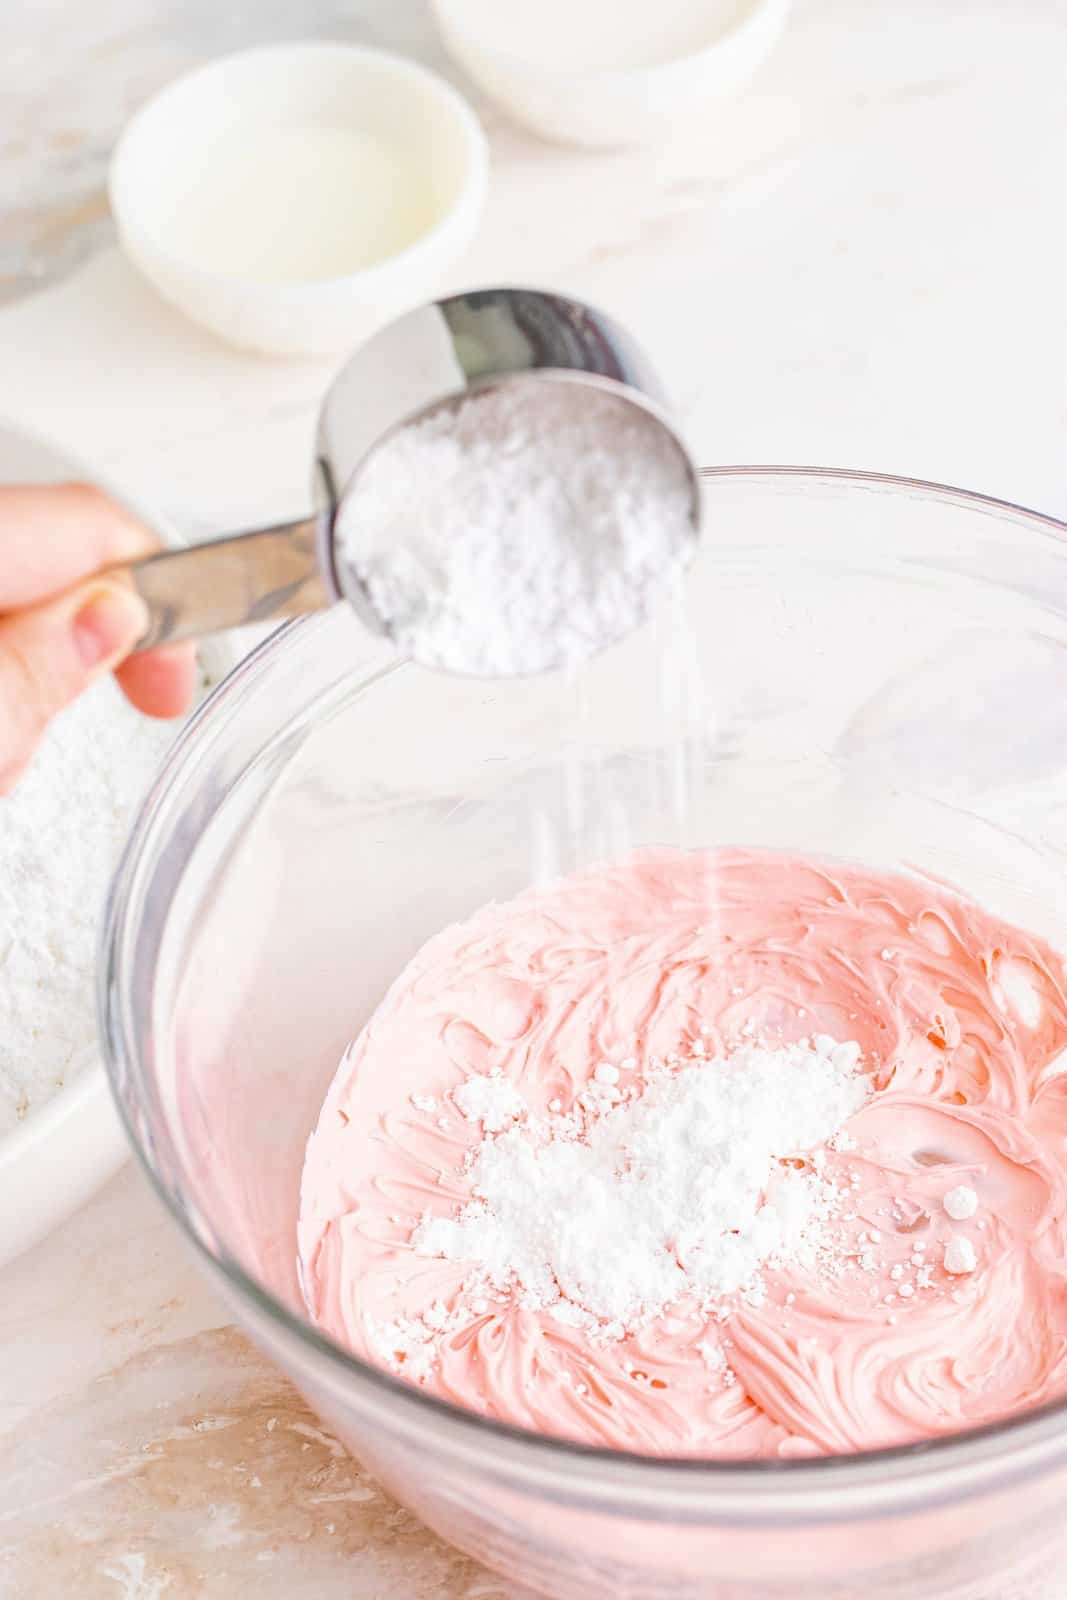 powdered sugar being added to cream cheese and food coloring mixture.